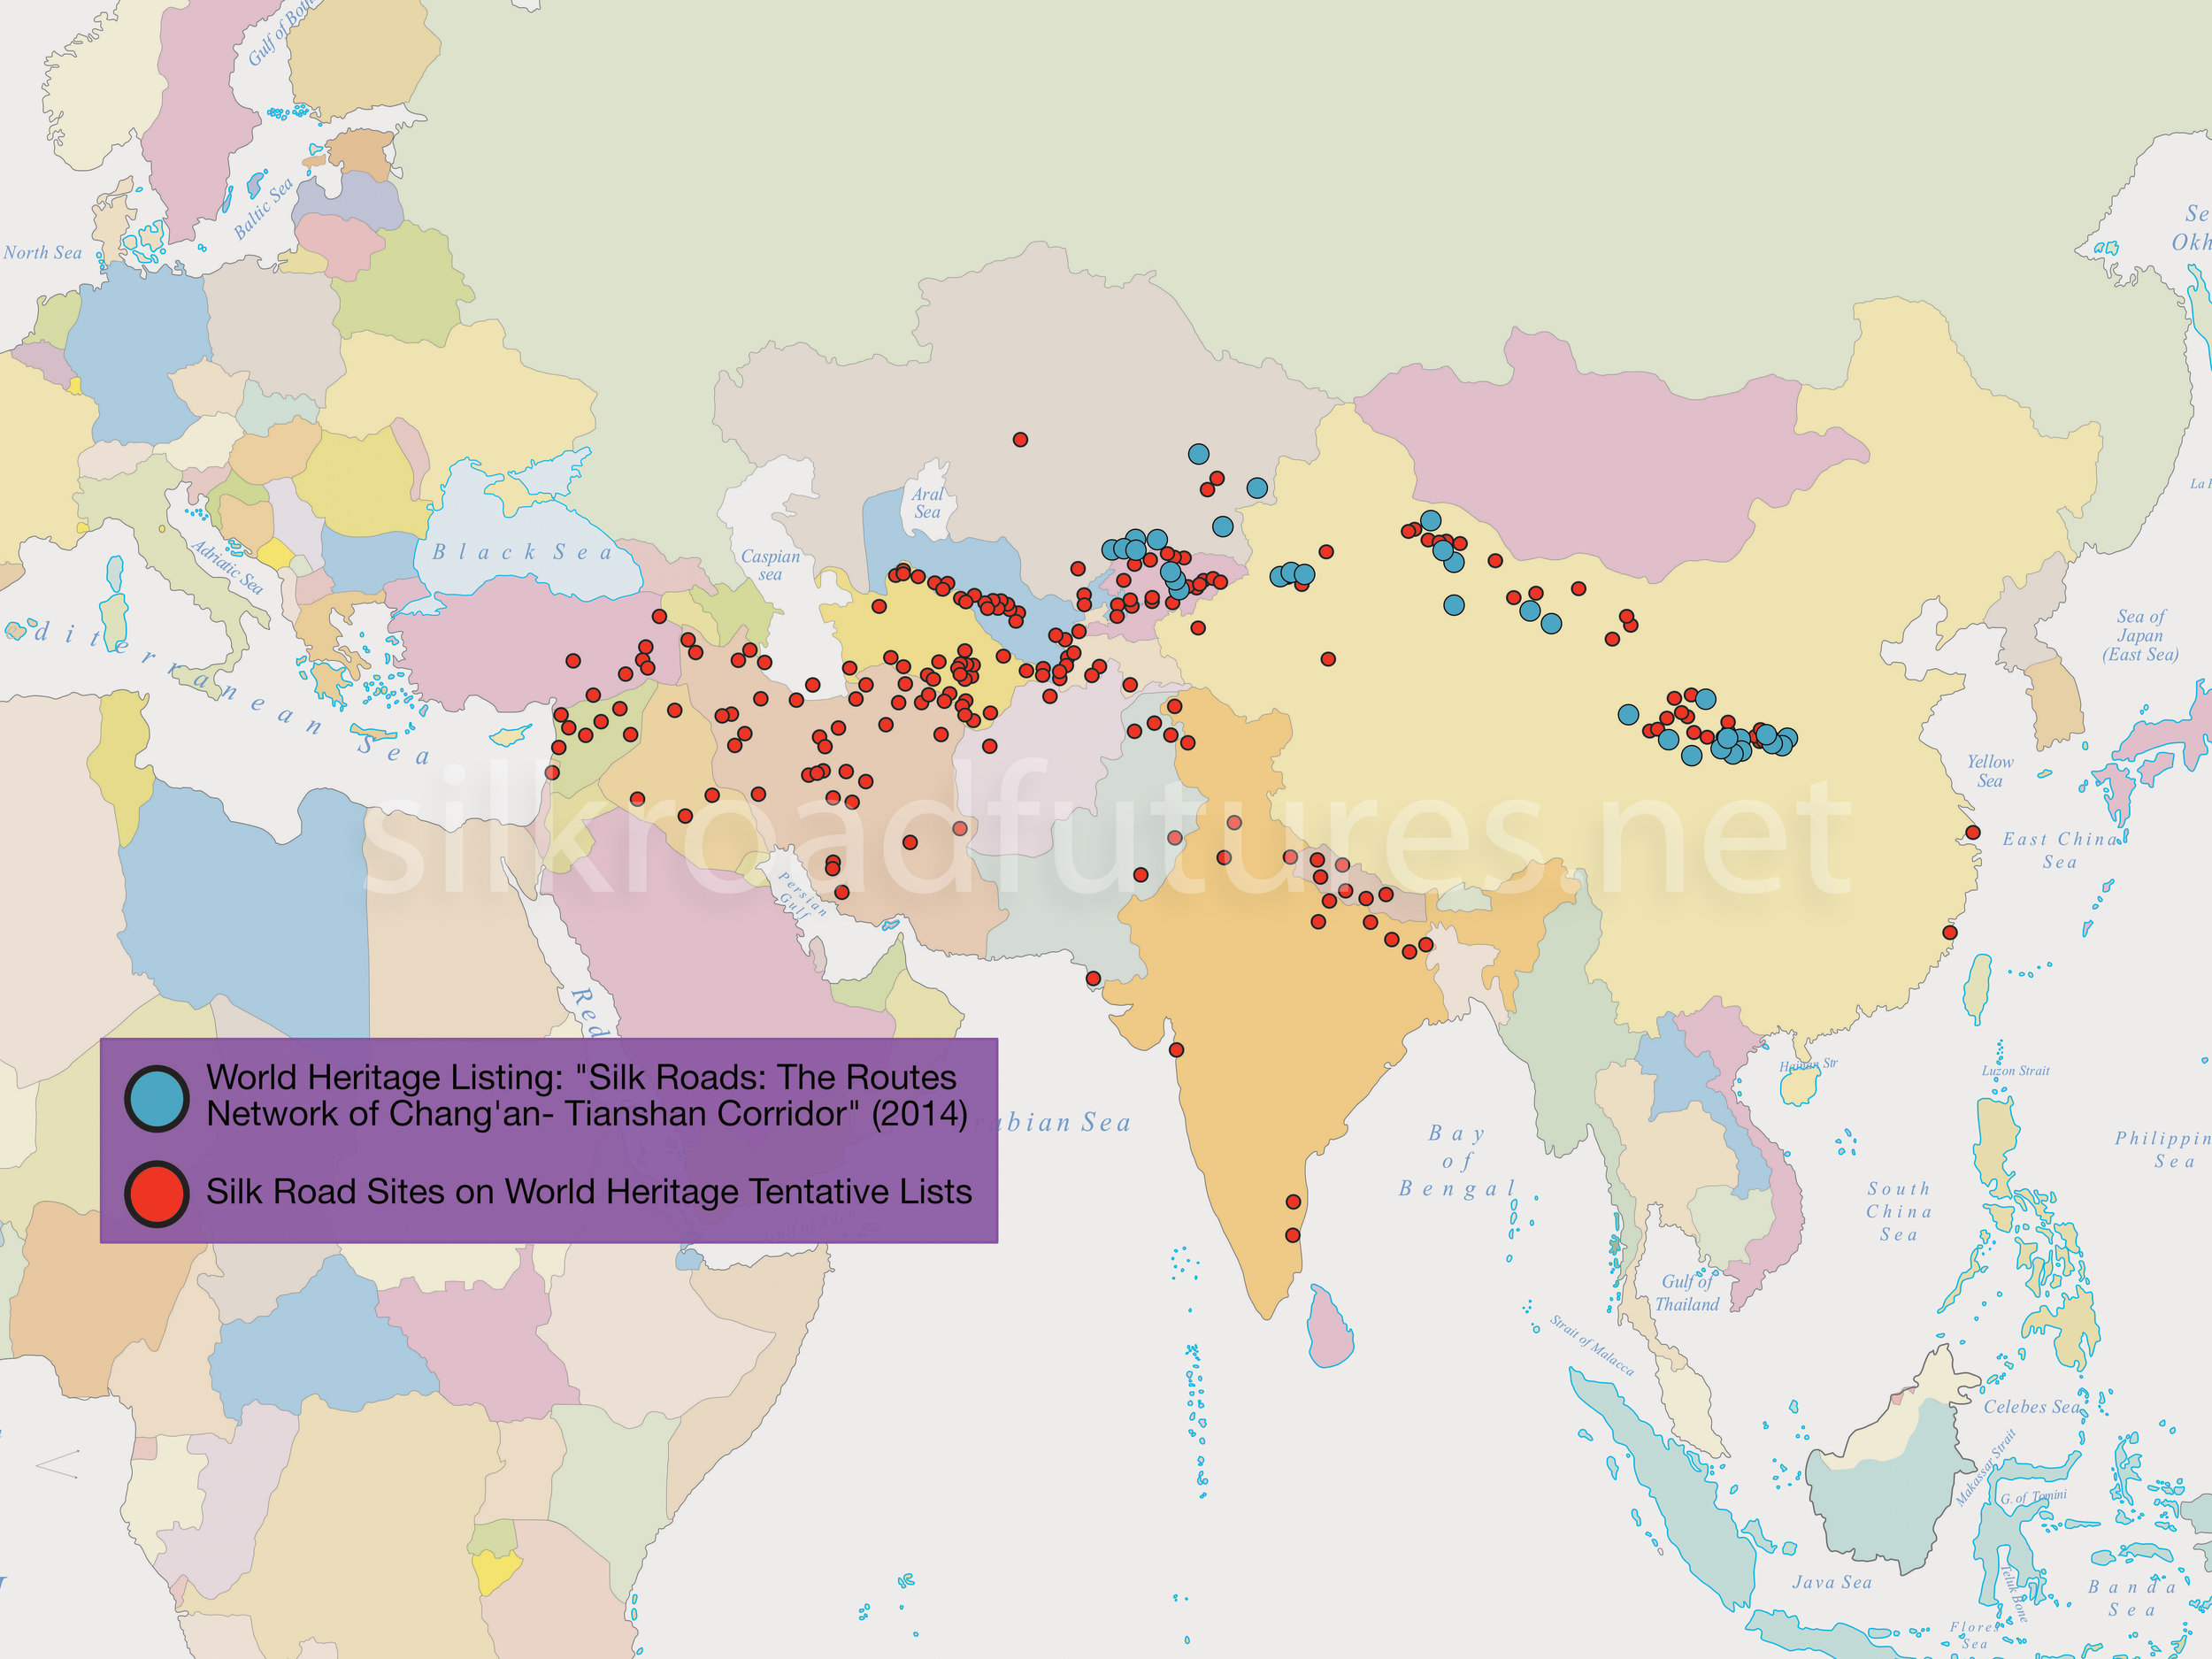 Silk Road Sites on WHS TLs - ZOOMED IN - cropped.jpg